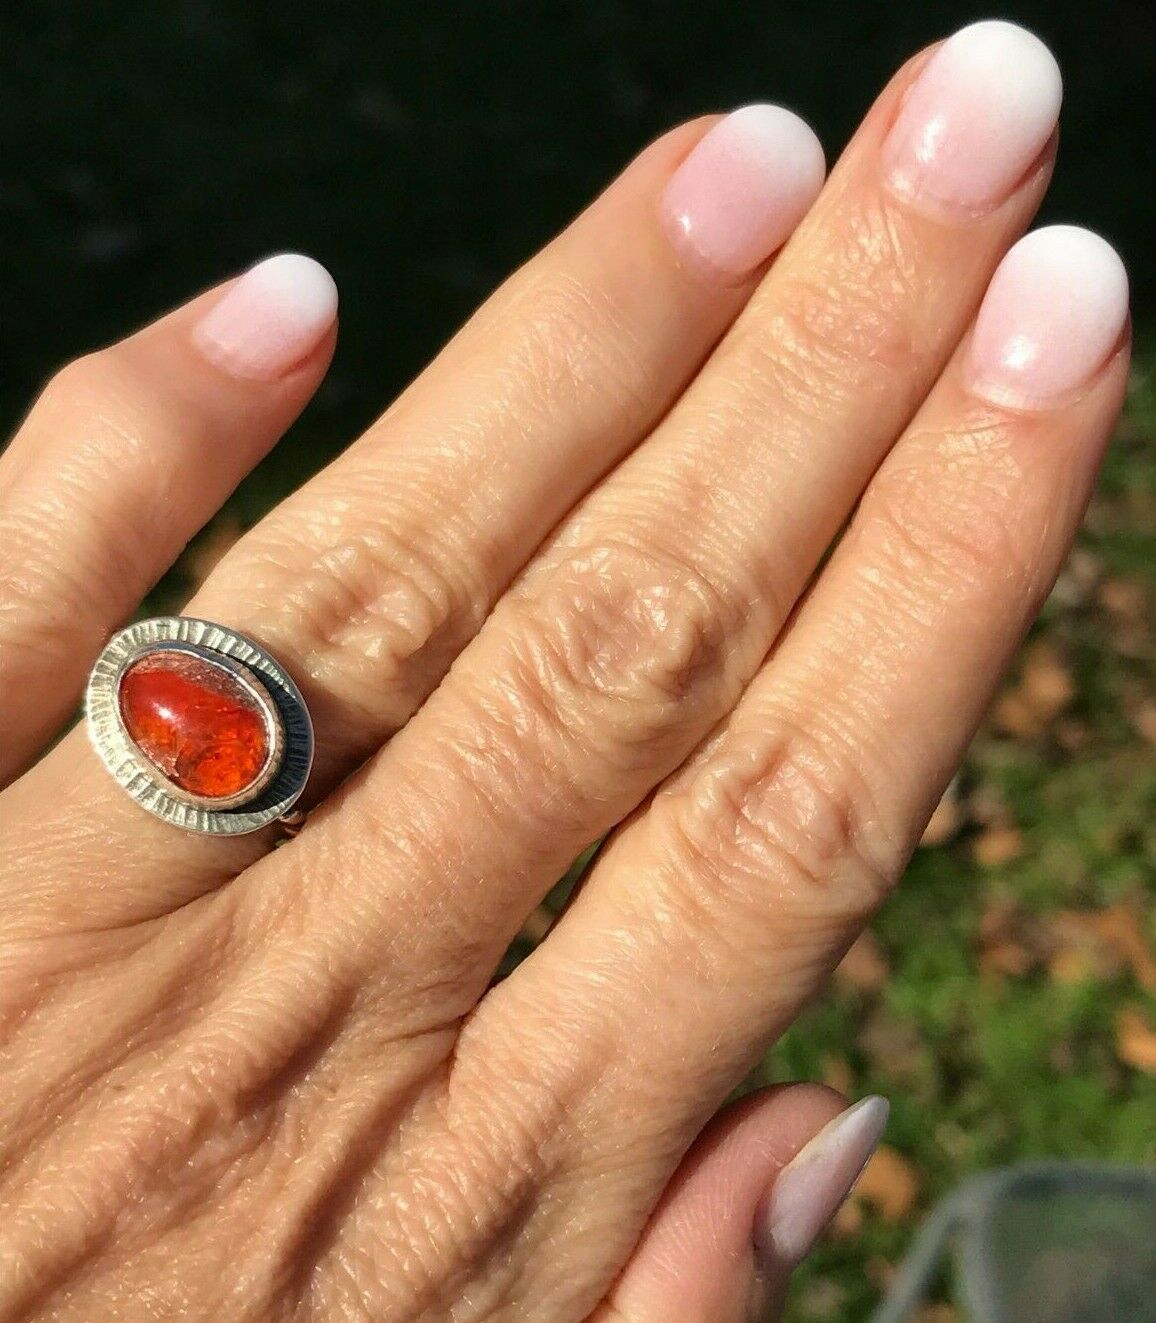 Opal ring, natural opal ring, fire opal ring, opal jewelry, anniversary  gift, ring for her, Celtic rings, 925 sterling silver, rainbow opal